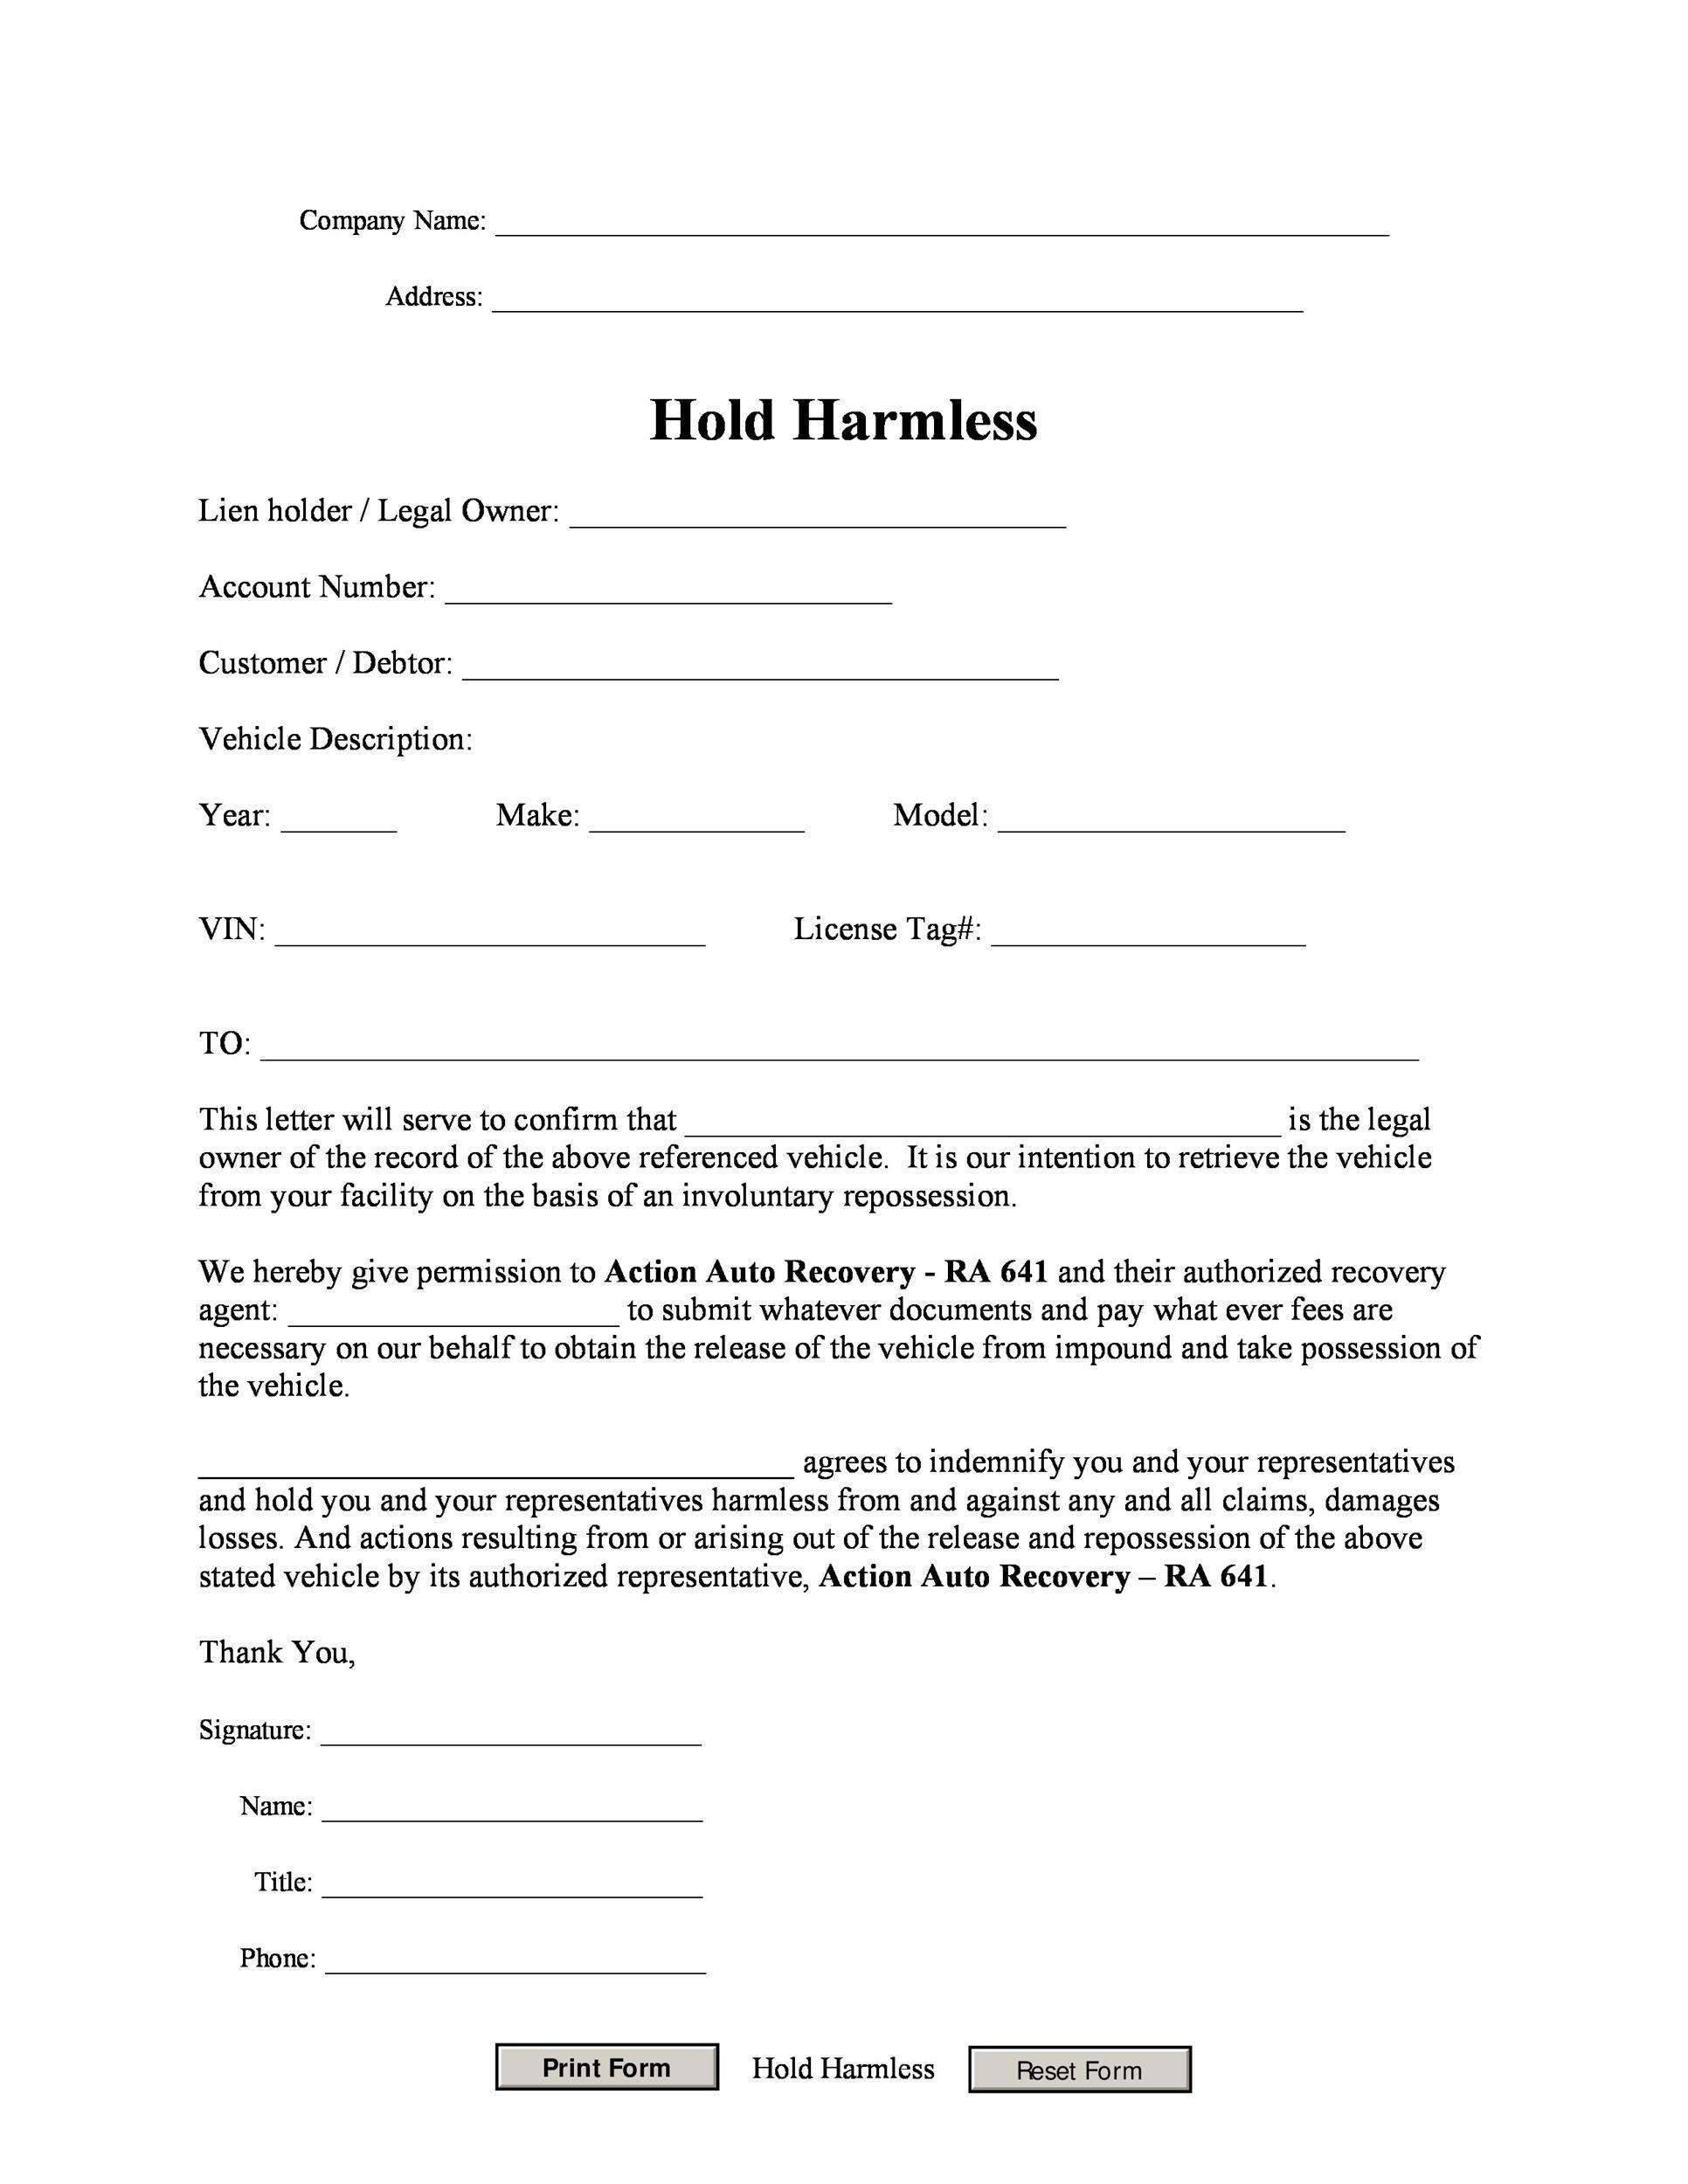 Mutual Hold Harmless Agreement Template For Your Needs